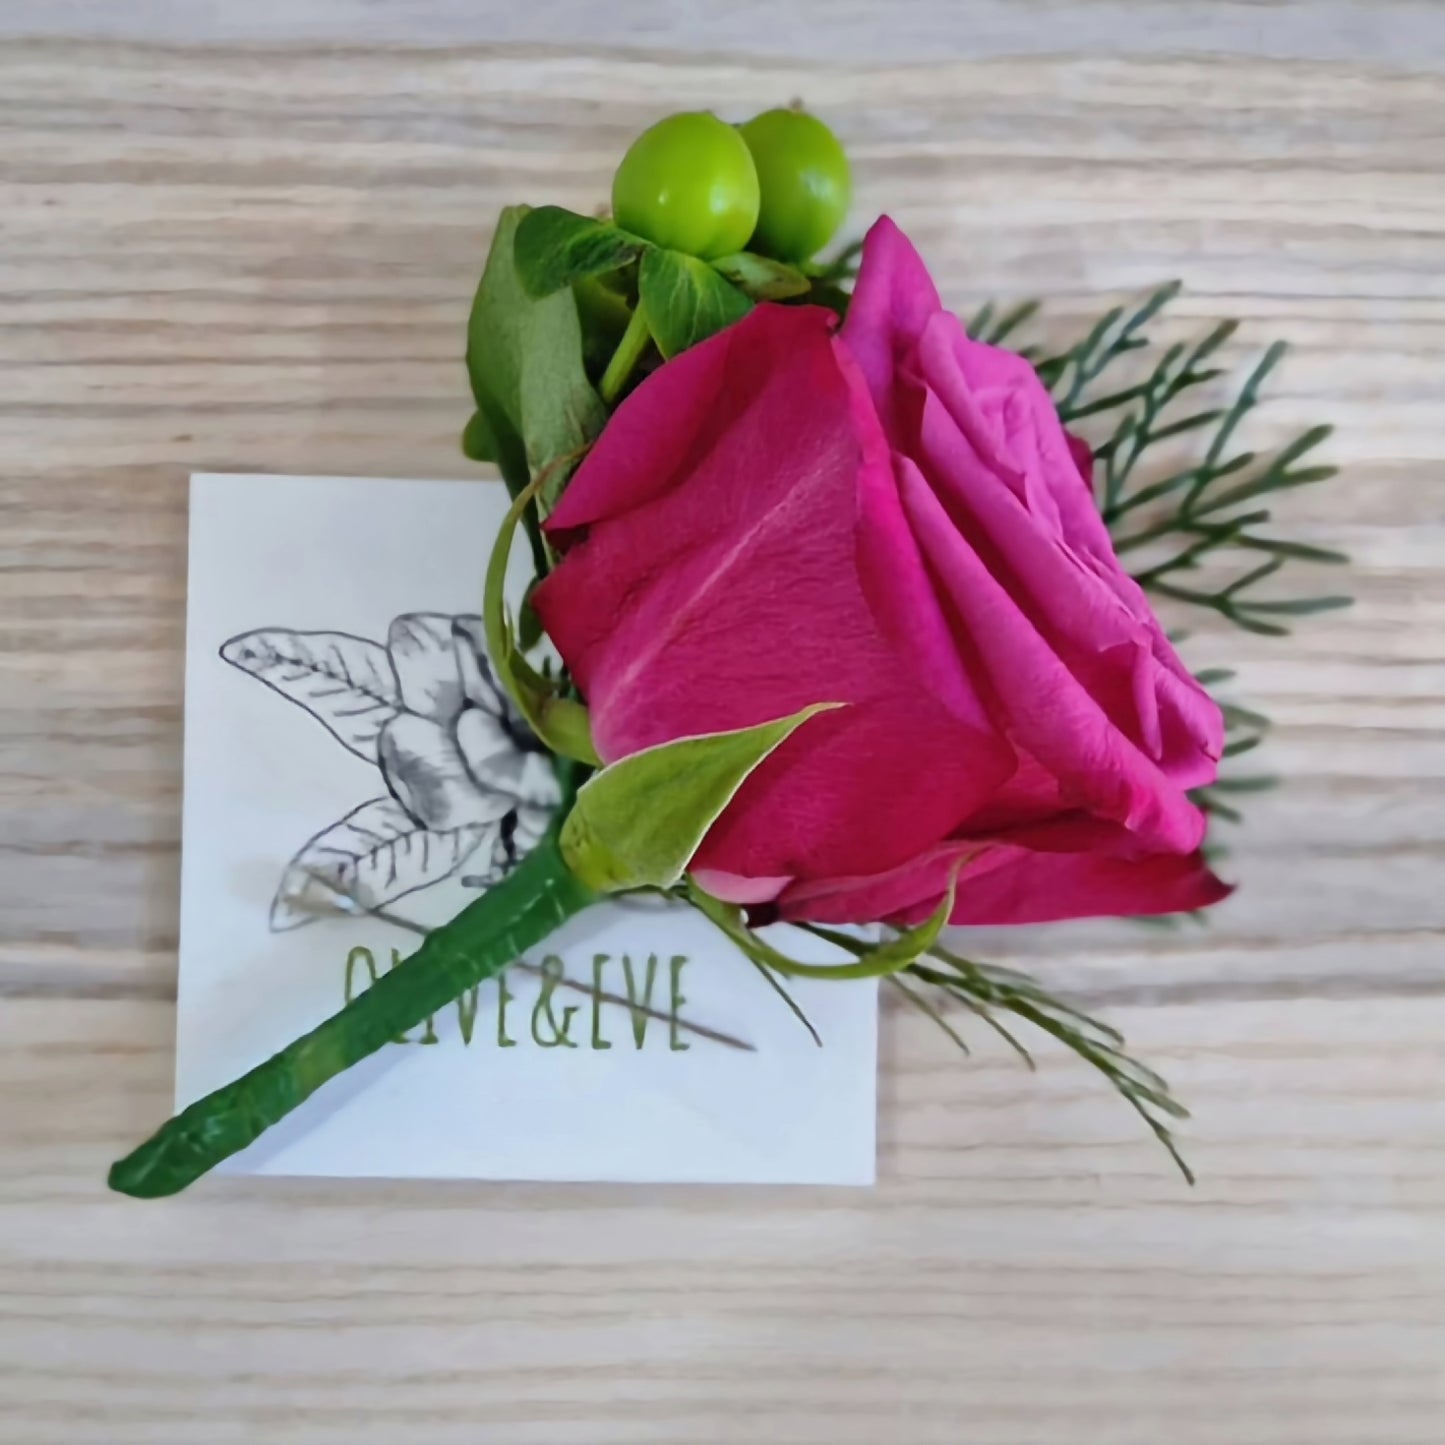 Contrasting Colours - Wedding Bouquet and Buttonhole